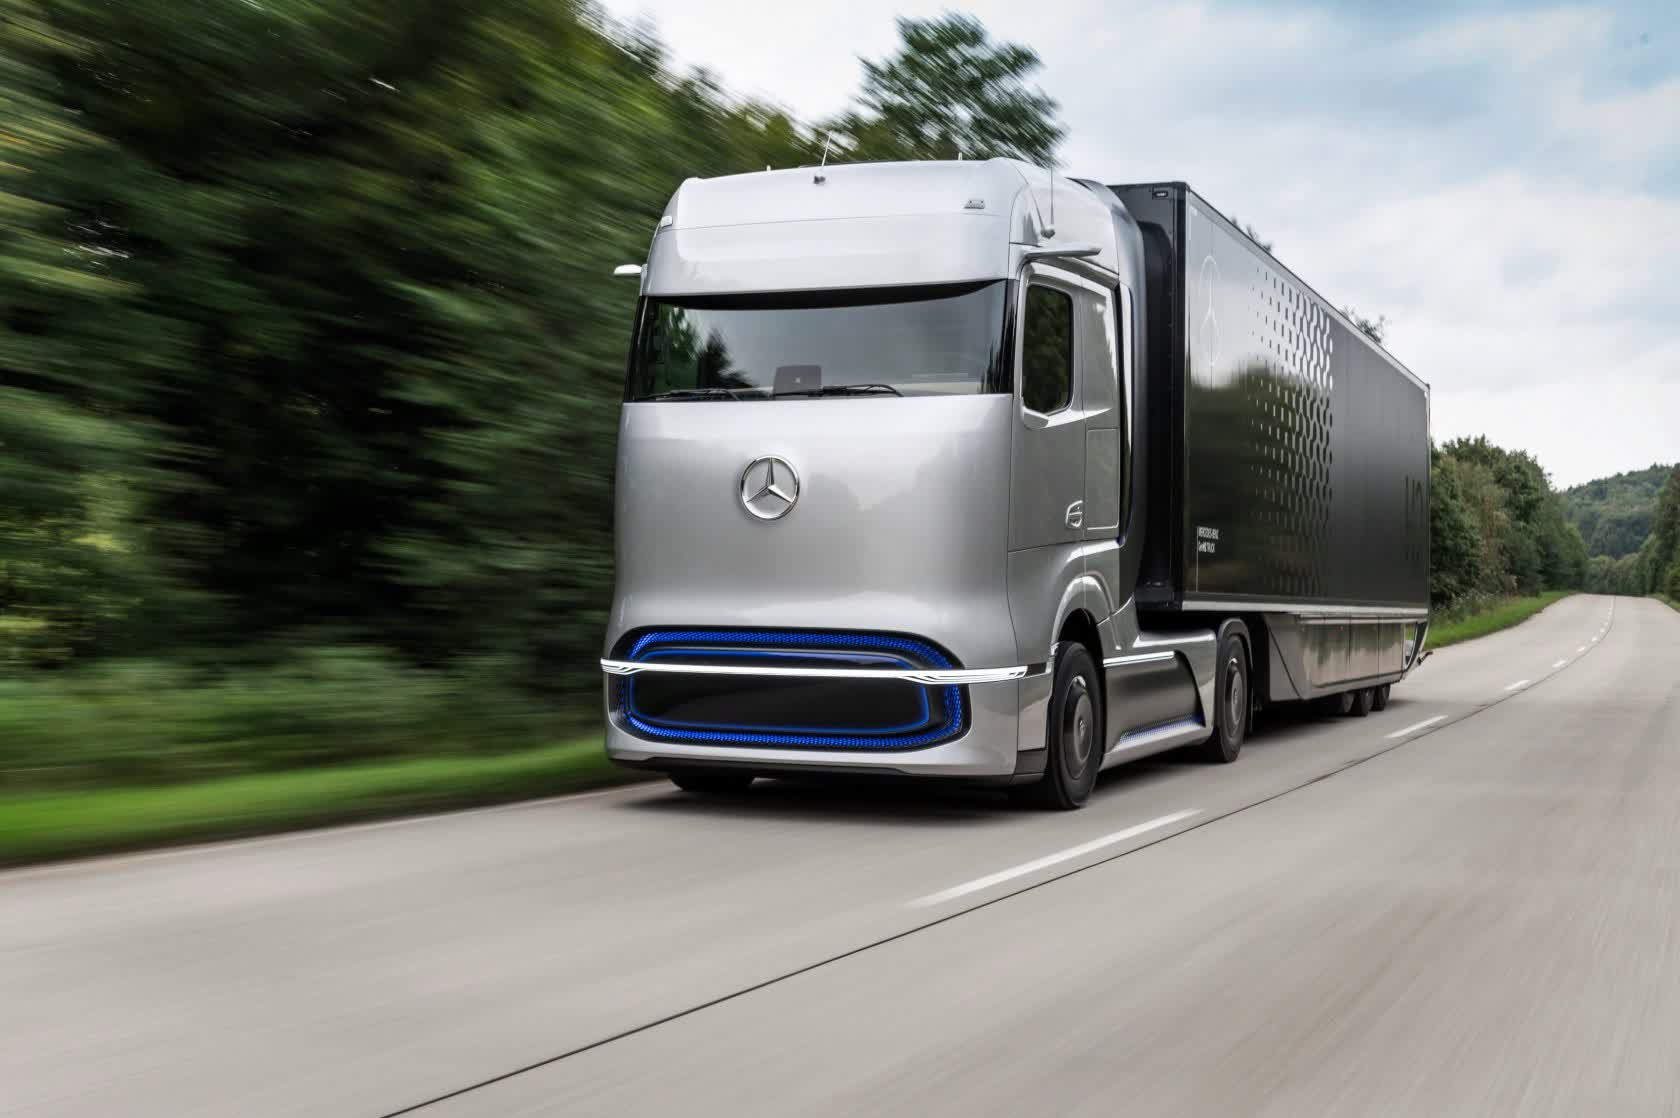 Daimler and Volvo are joining forces to develop fuel cells for heavy-duty vehicles